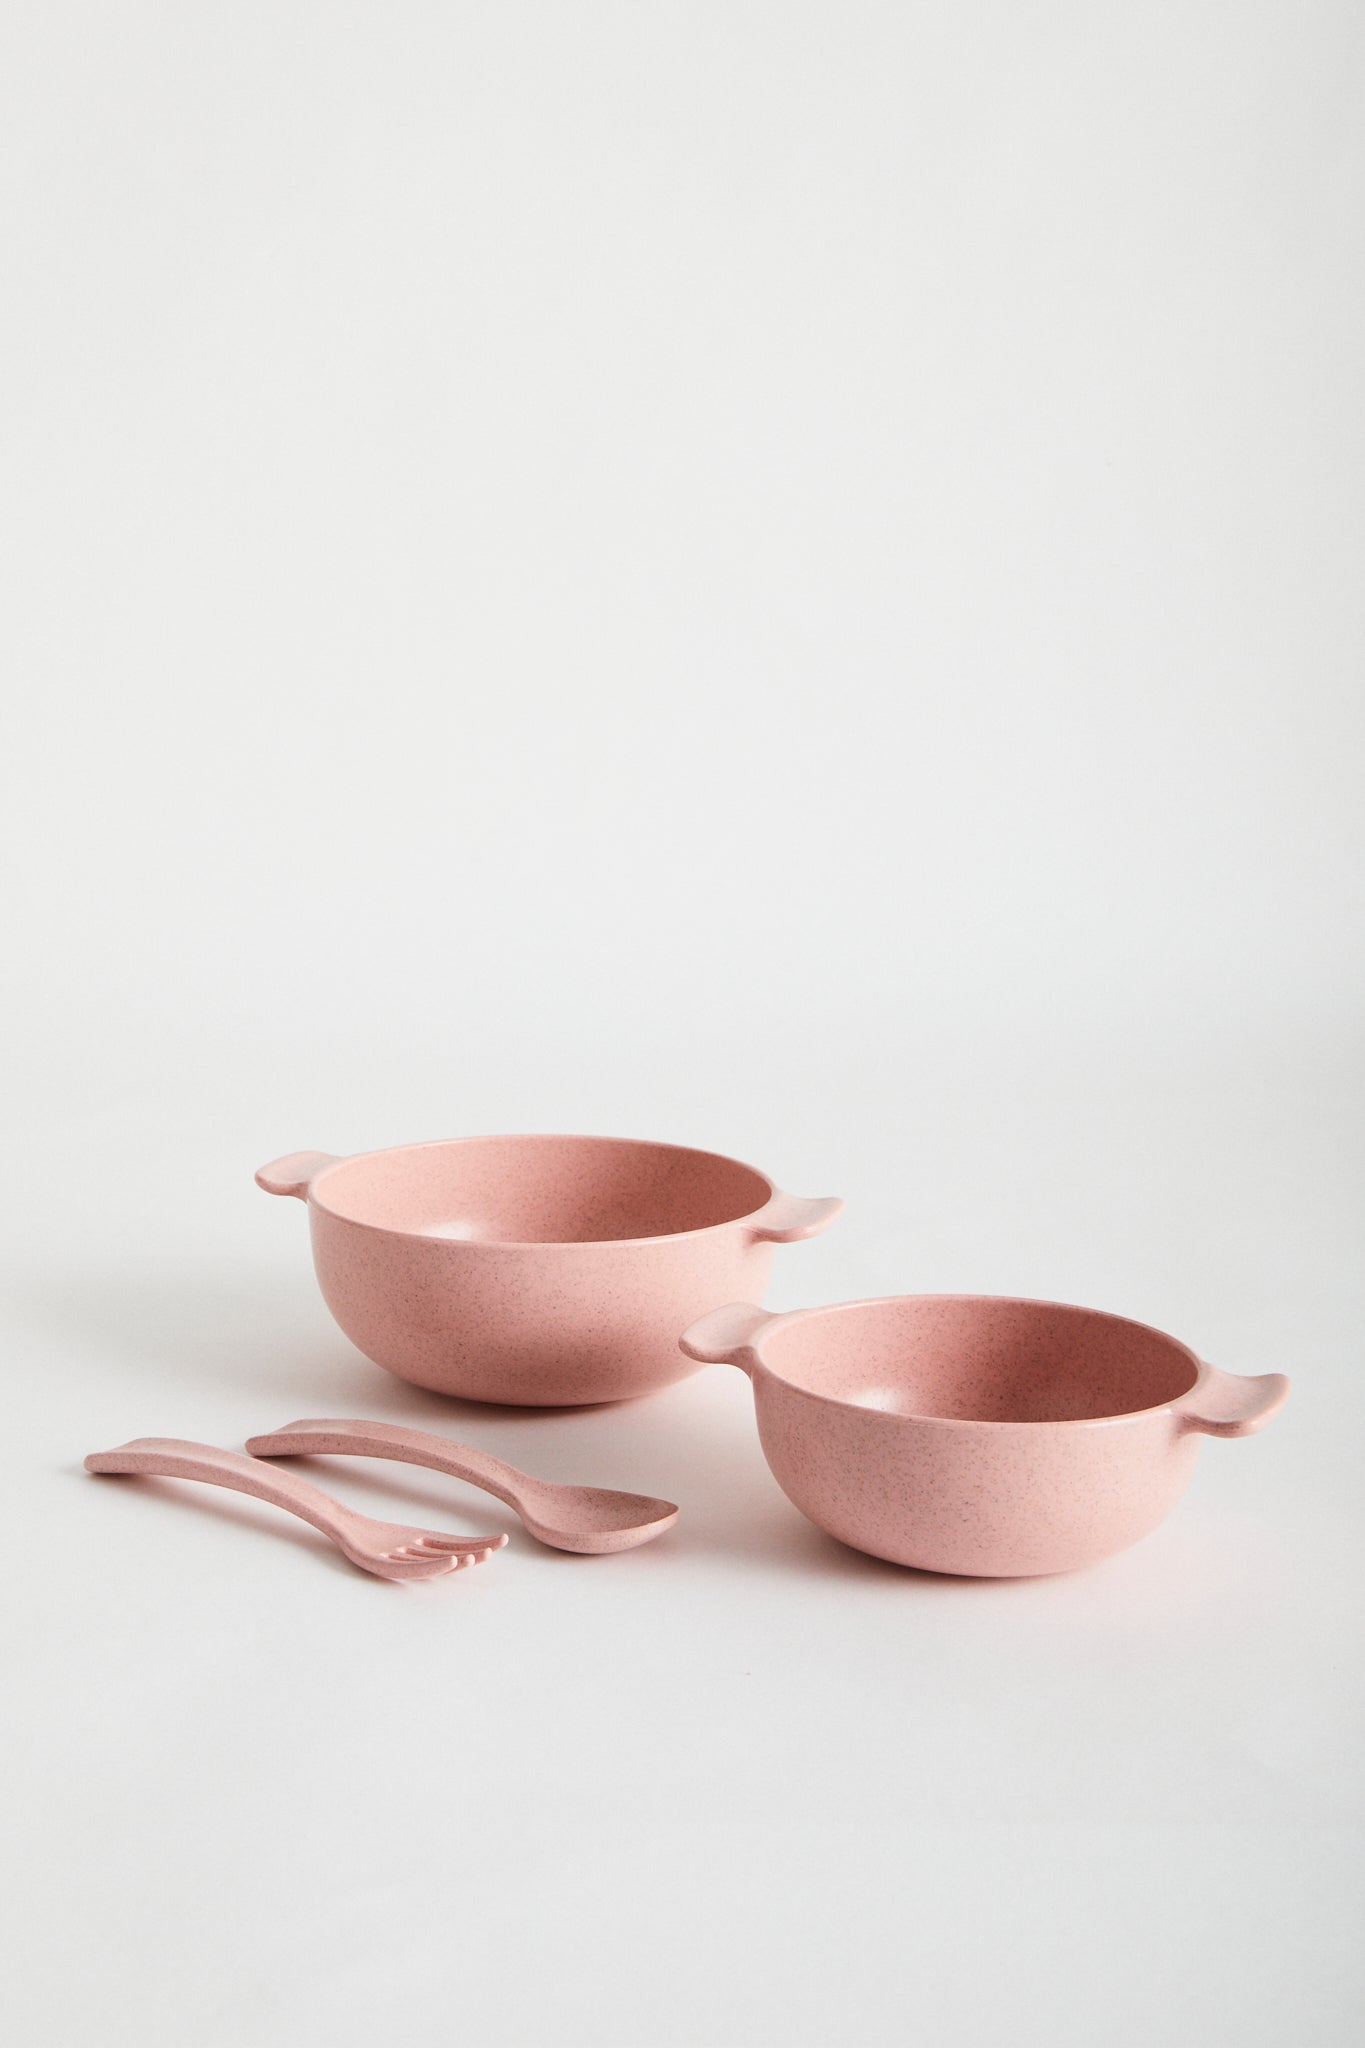 Wheat straw dinnerware set in Rose, -Set contains: 1 x large bowl, 1 x small bowl, 1 x spoon & fork